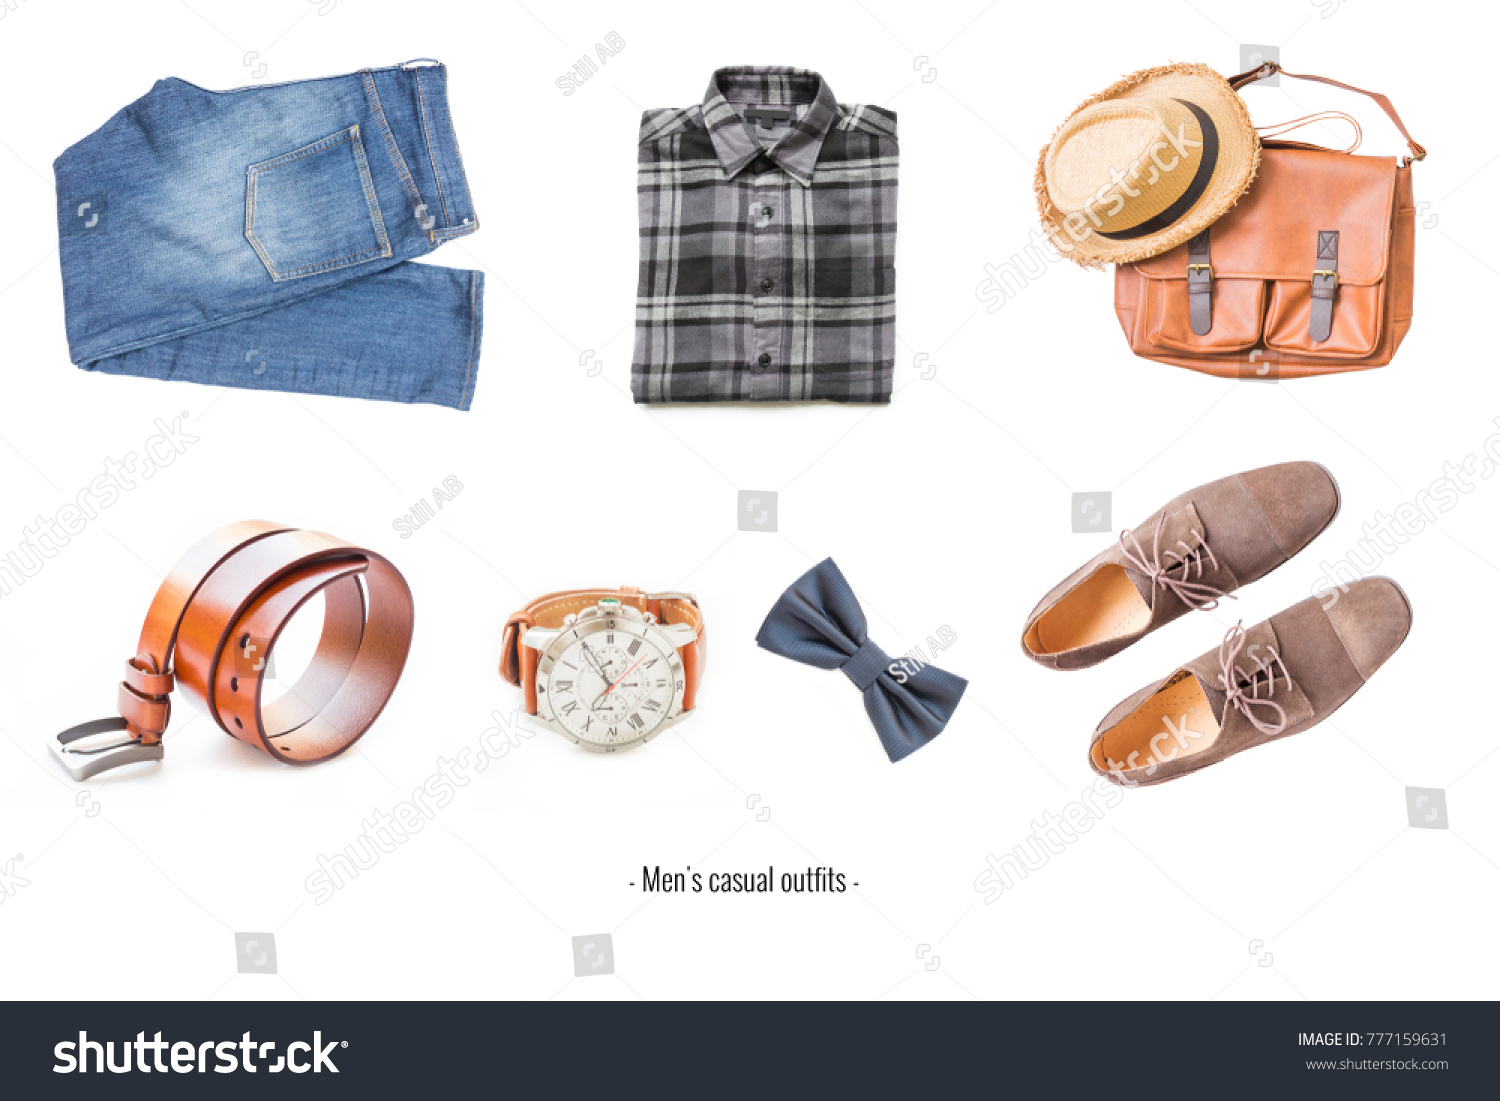 Men's casual outfits with accessories items on white background, fashion and beauty concept #777159631